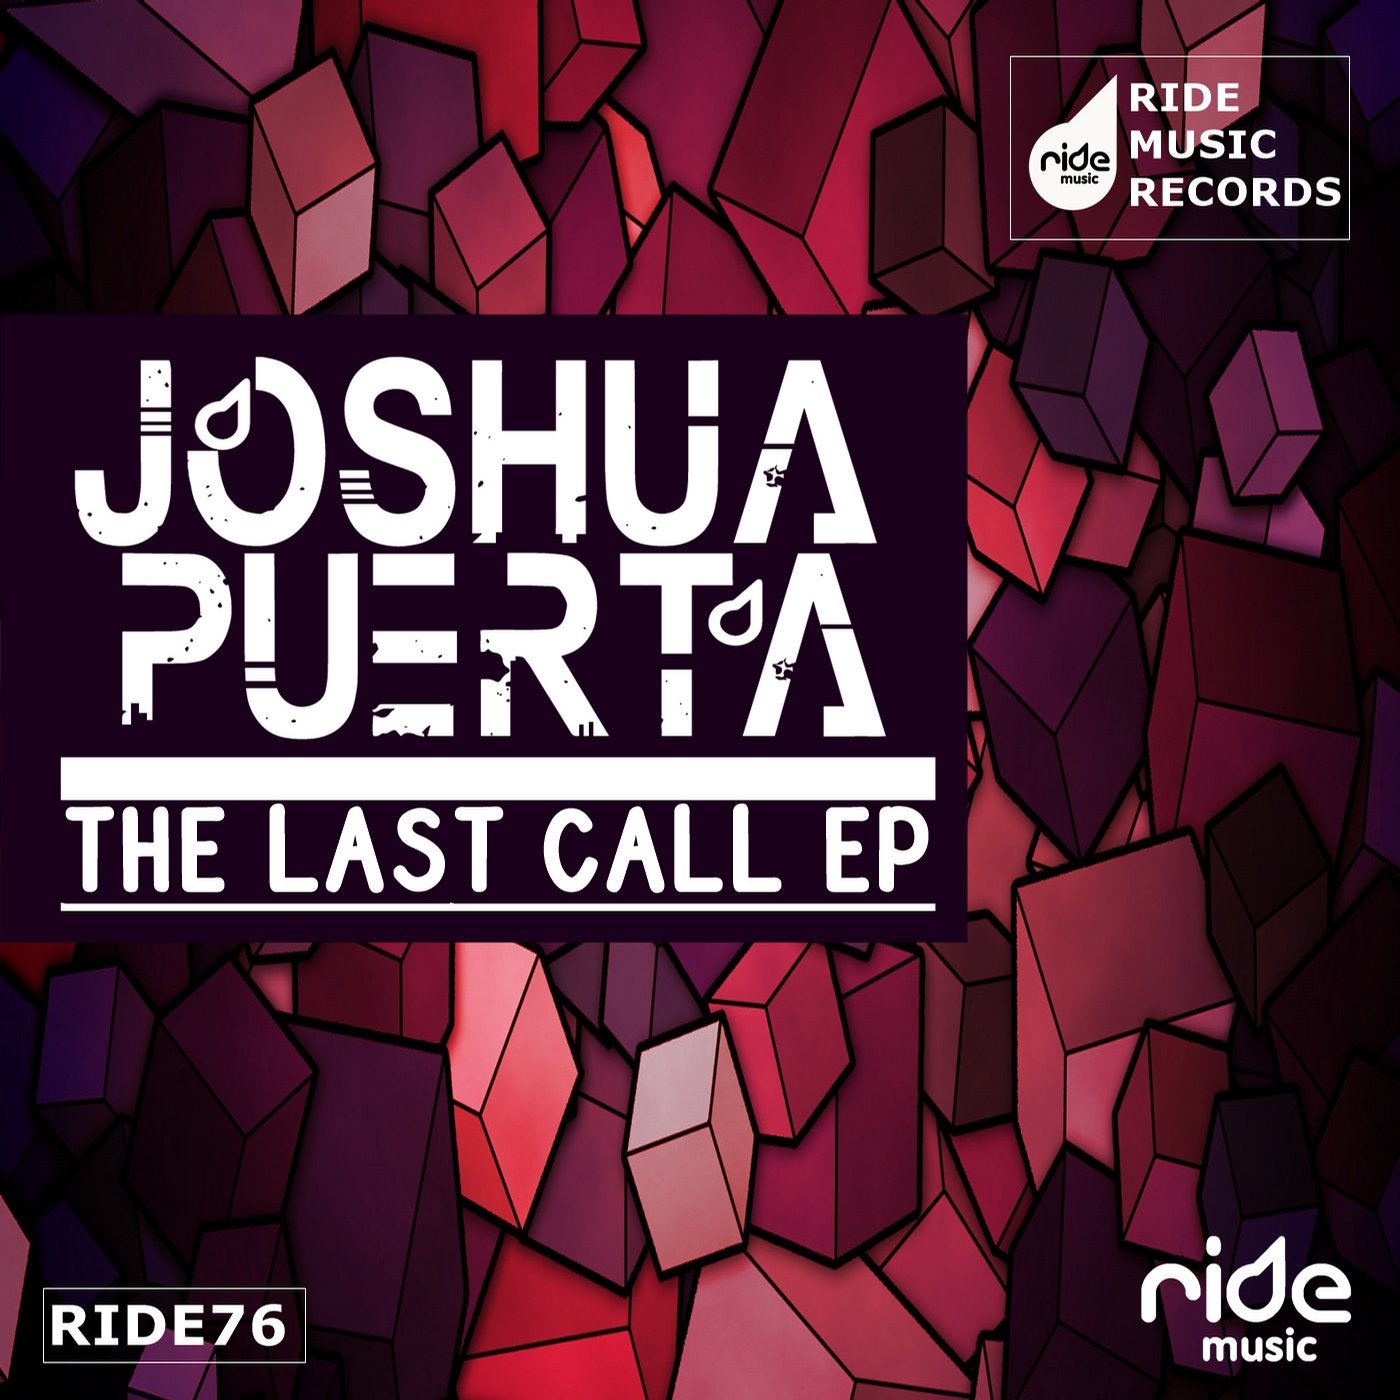 The Last Call ep